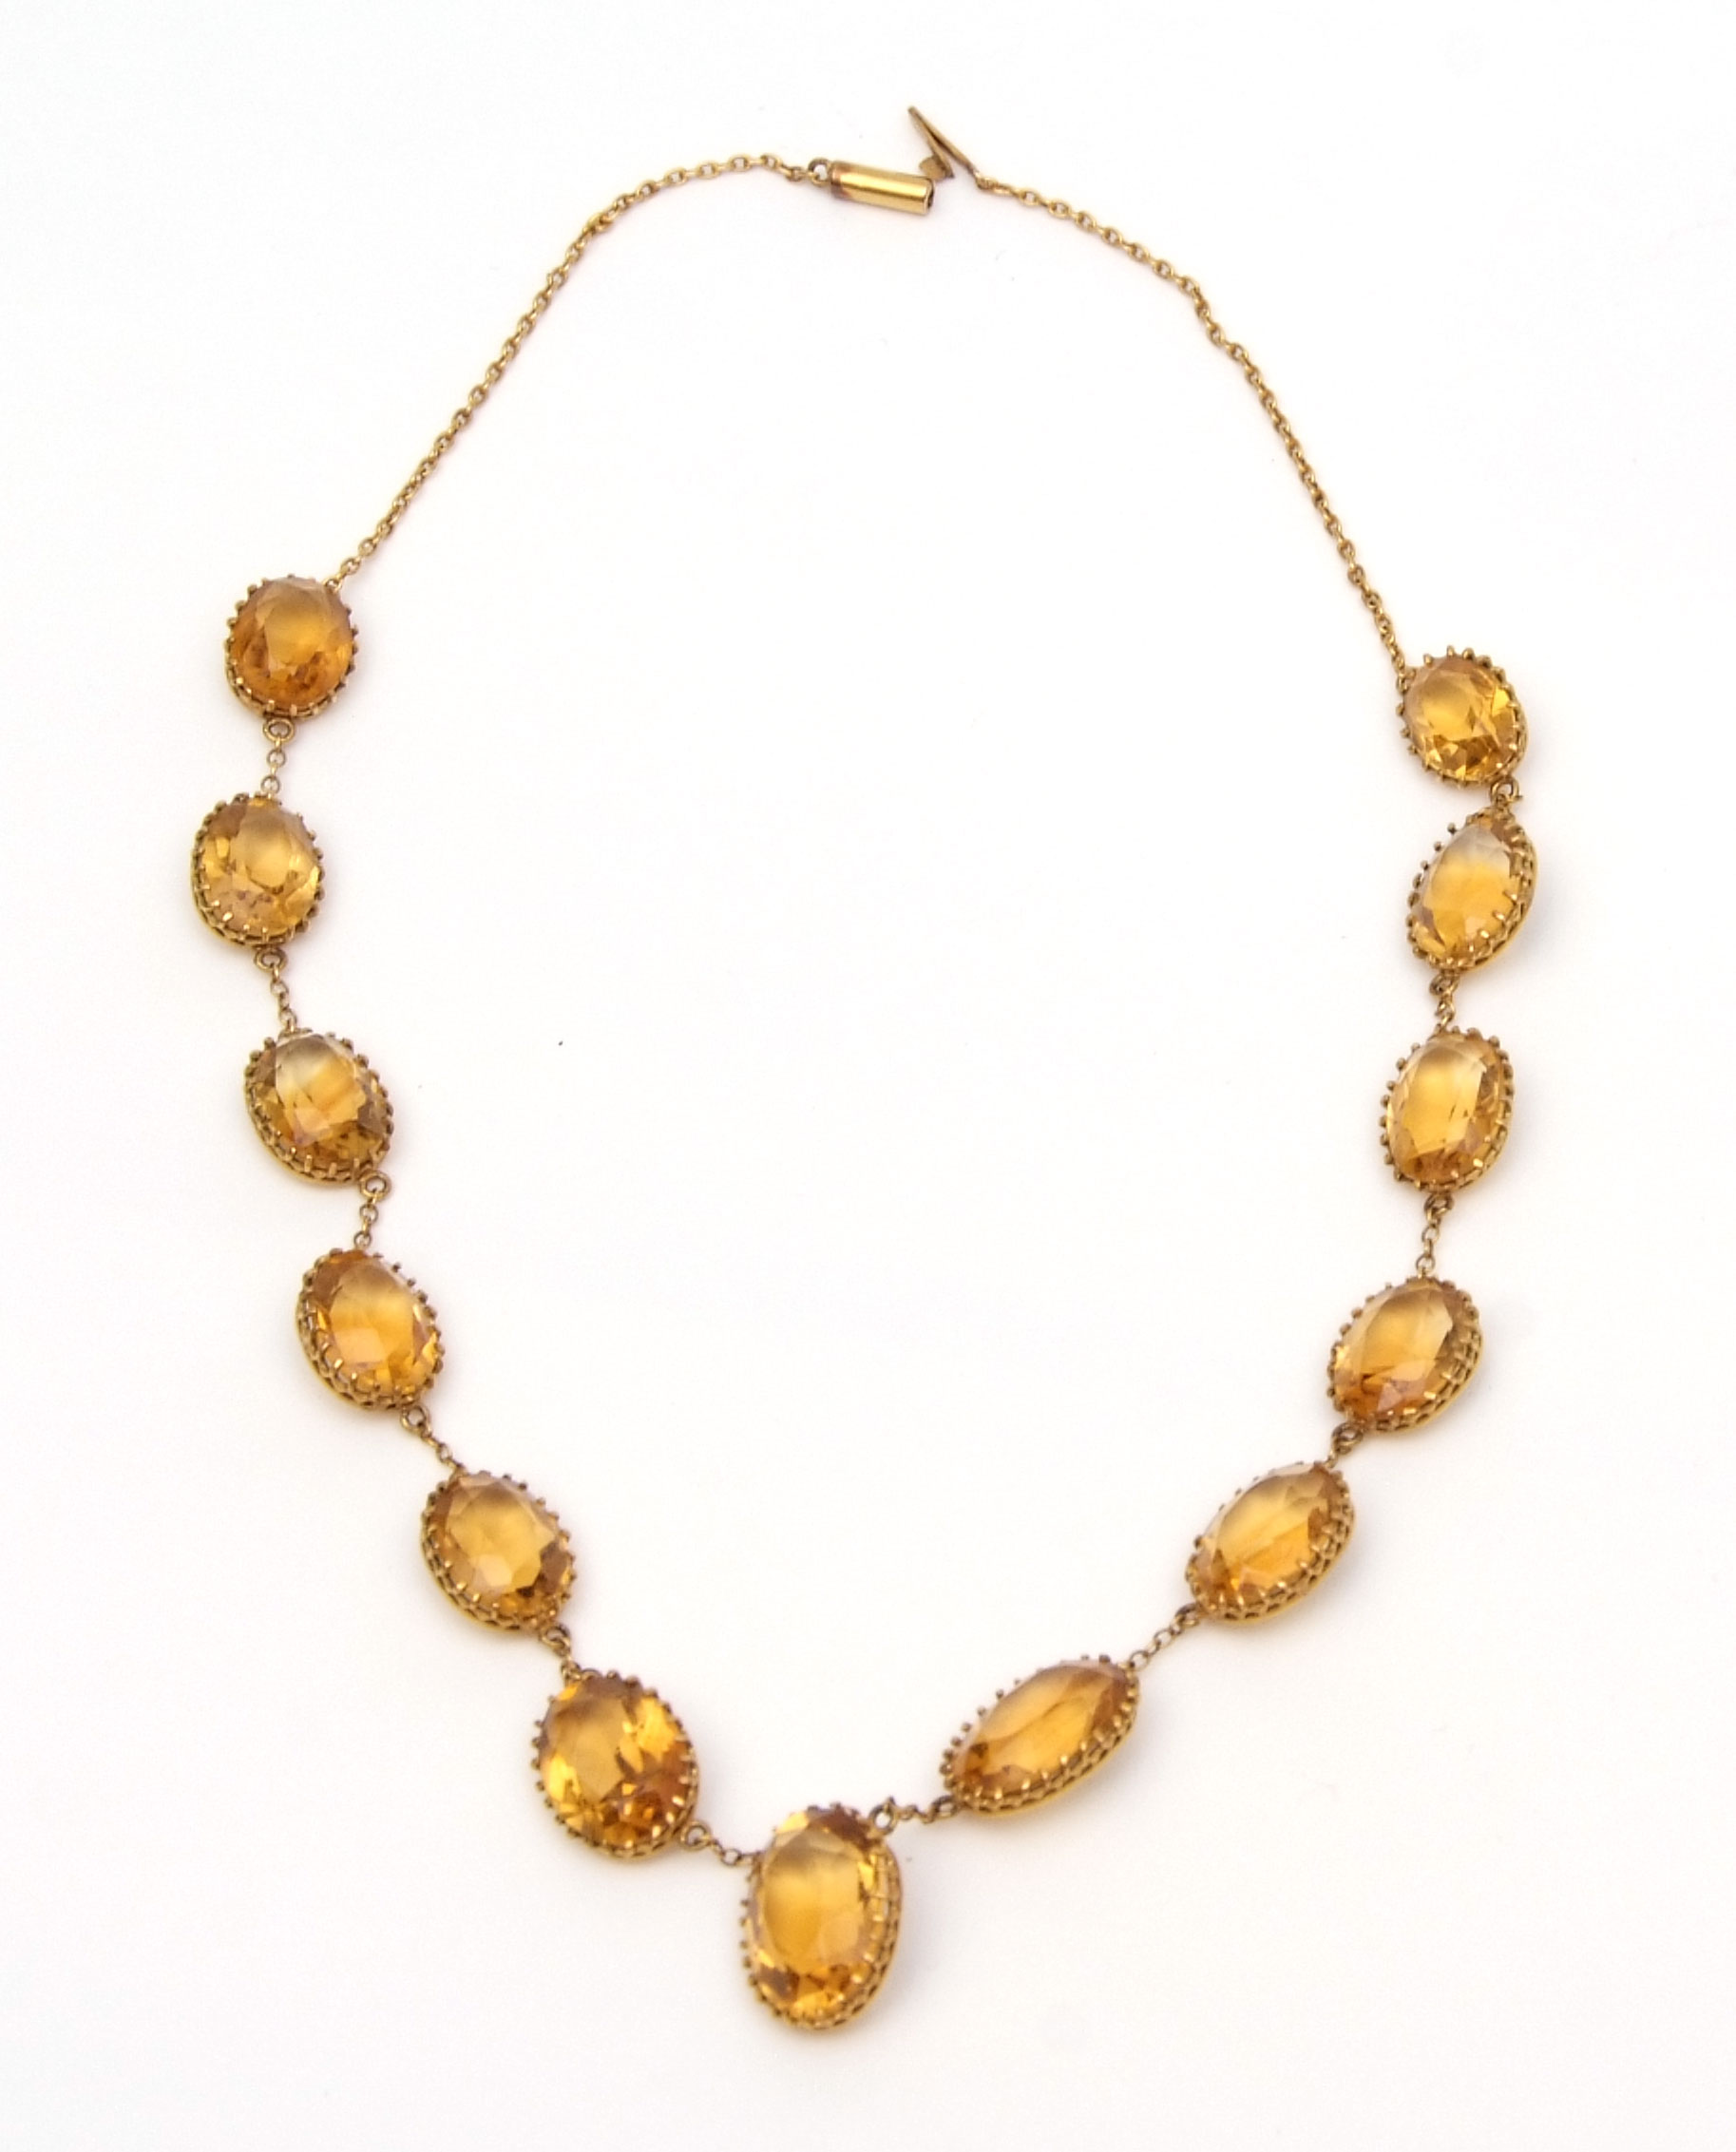 Citrine mounted riviere necklace, mounted with graduated oval shaped citrines in coronet mounts, all